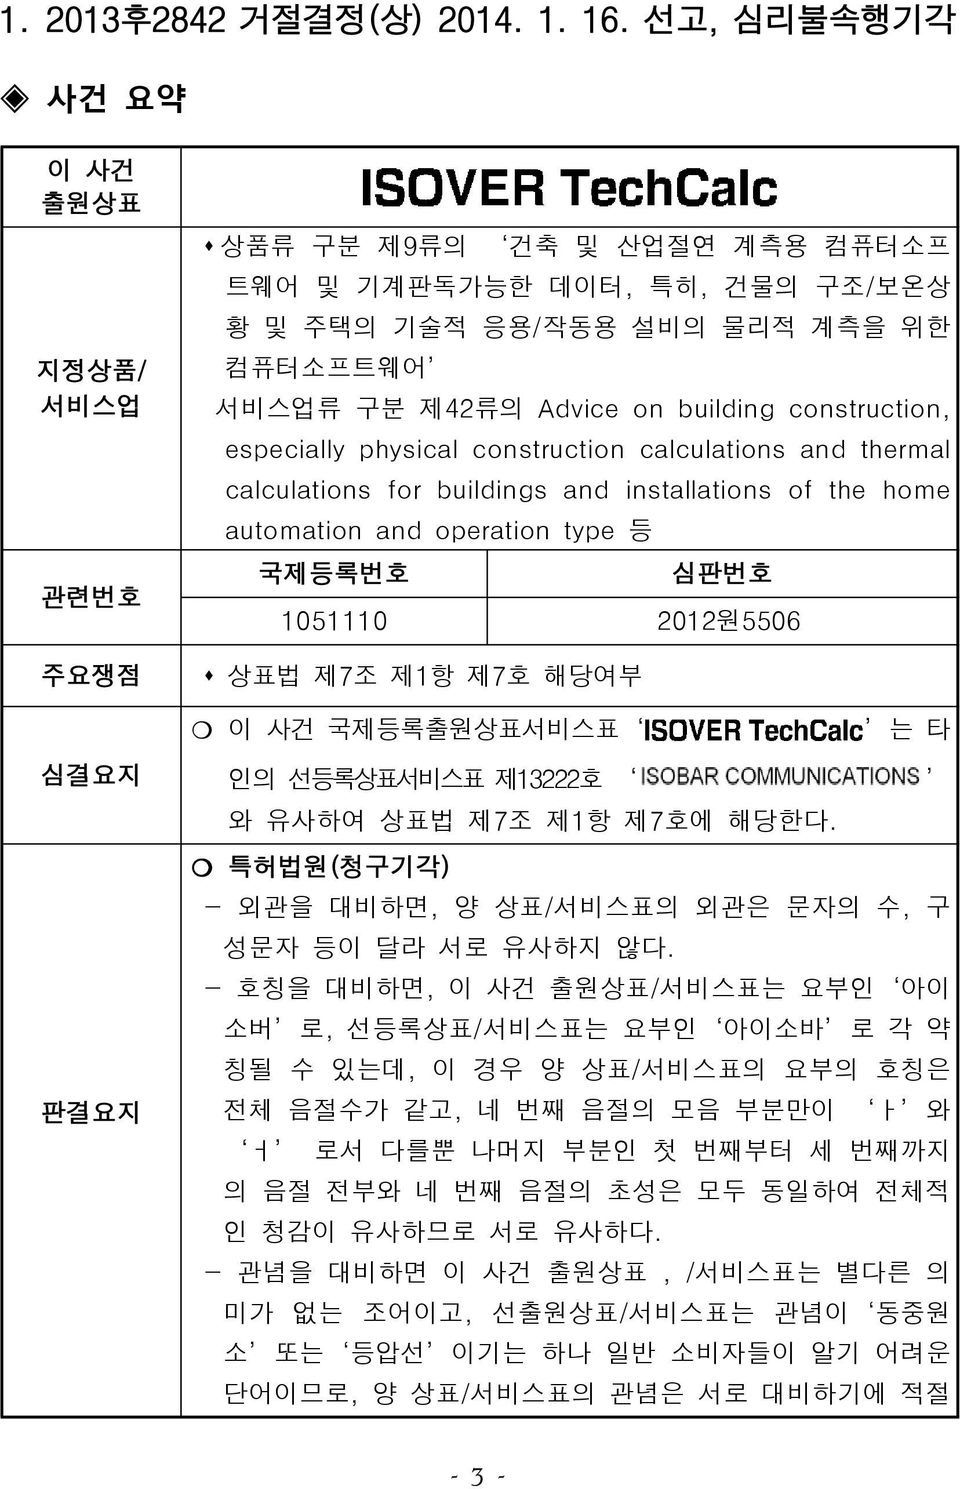 building construction, especially physical construction calculations and thermal calculations for buildings and installations of the home automation and operation type 등 국제등록번호 심판번호 1051110 2012원5506